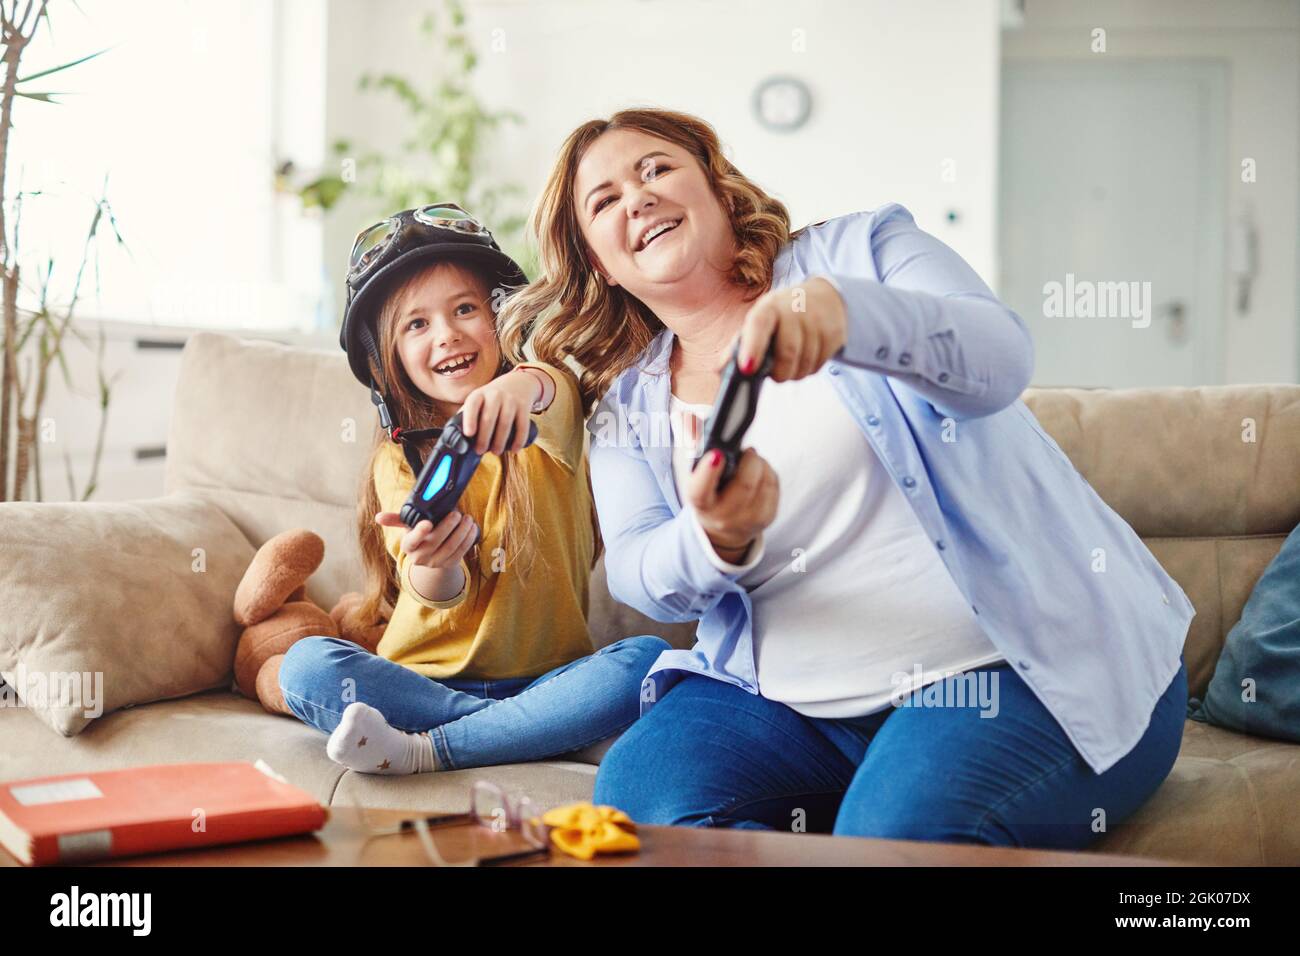 child daughter mother family happy playing console kid childhood Stock Photo